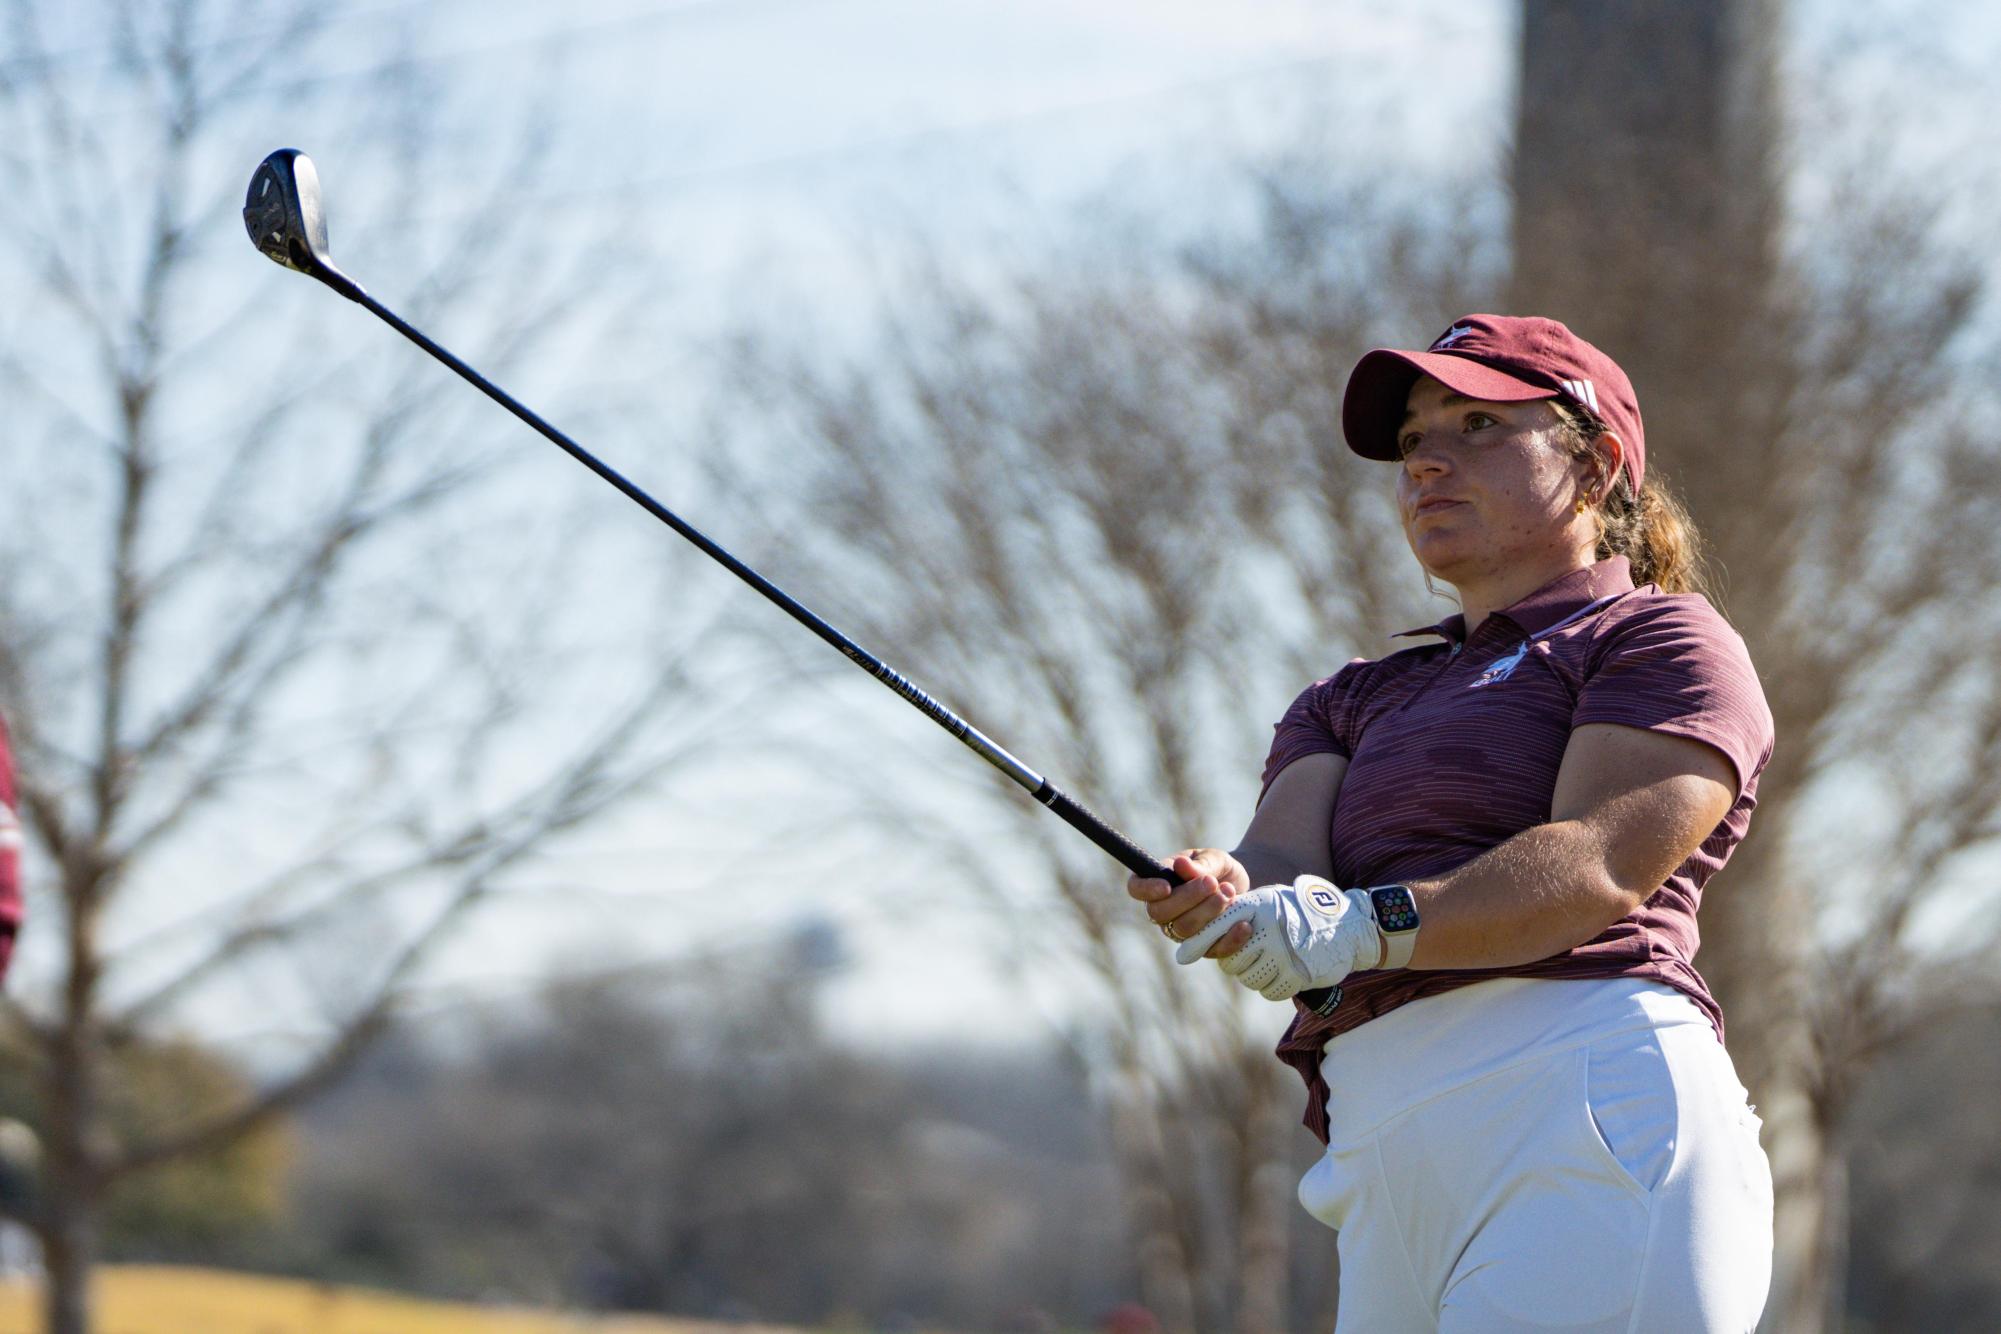 Texas State Women’s Golf Shines at NCAA Regionals with 10th Place Finish after Sun Belt Conference Victory